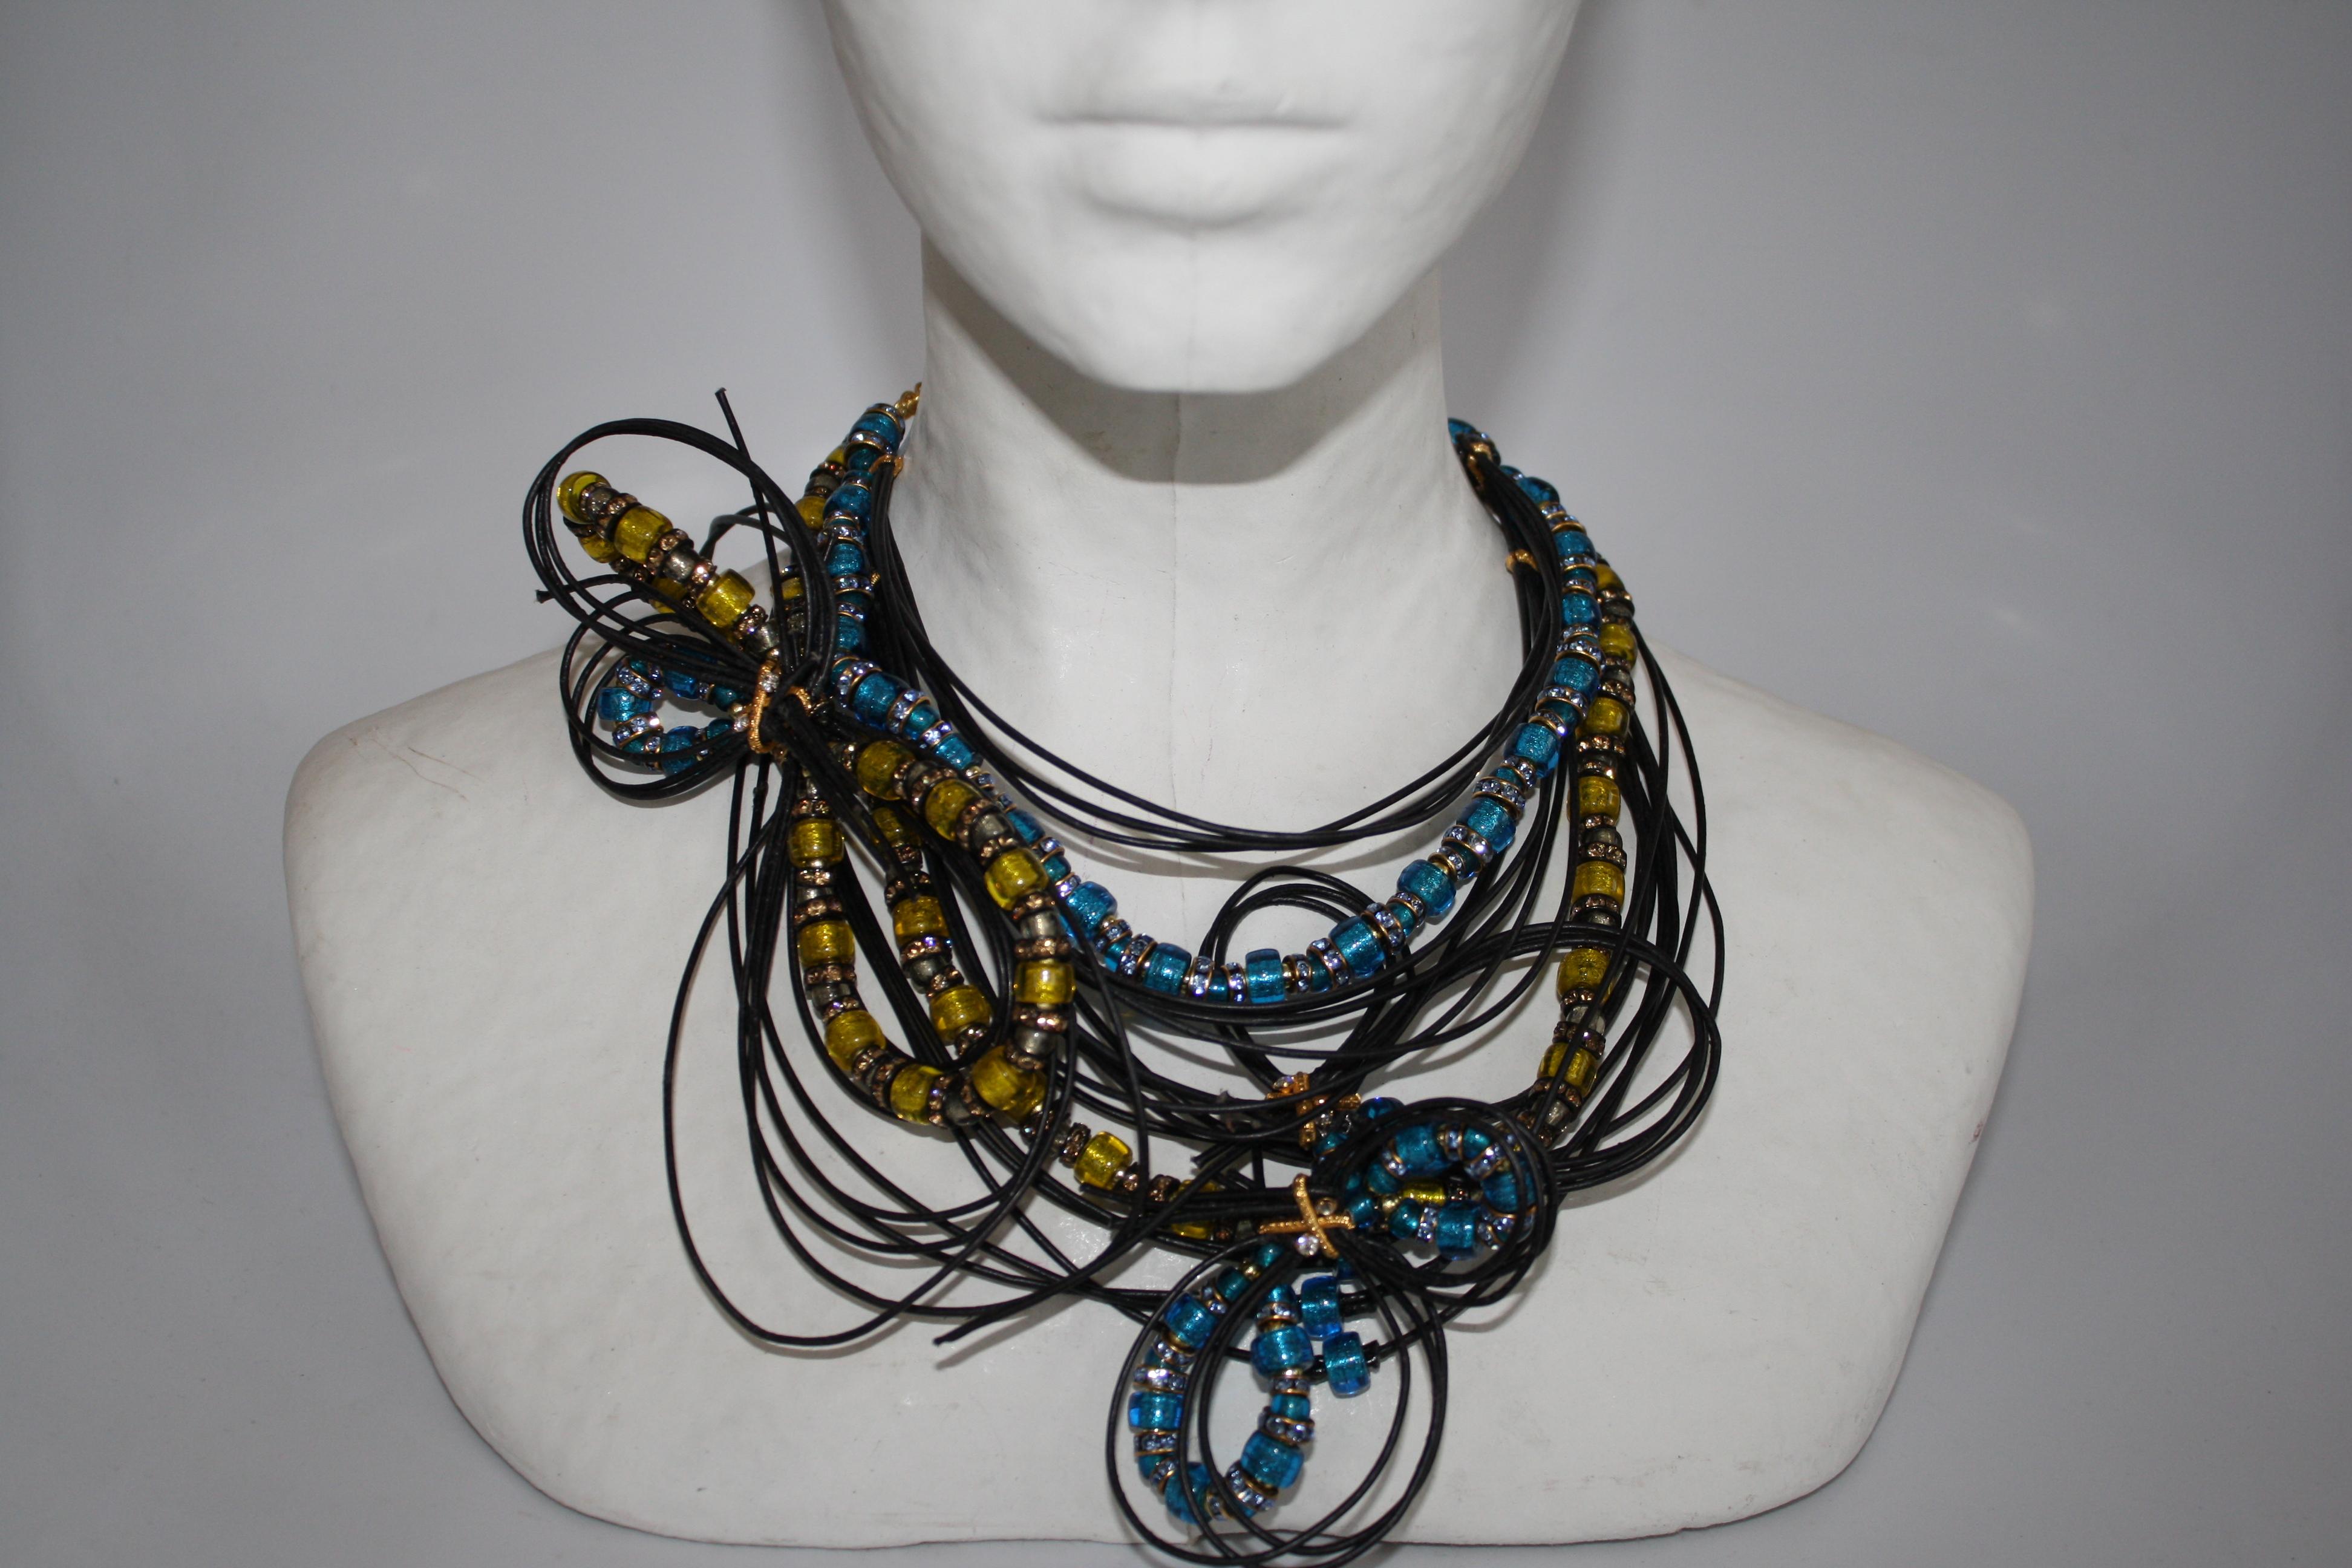 True artistry comes alive in this handmade leather and Murano glass necklace from Francoise Montague. 